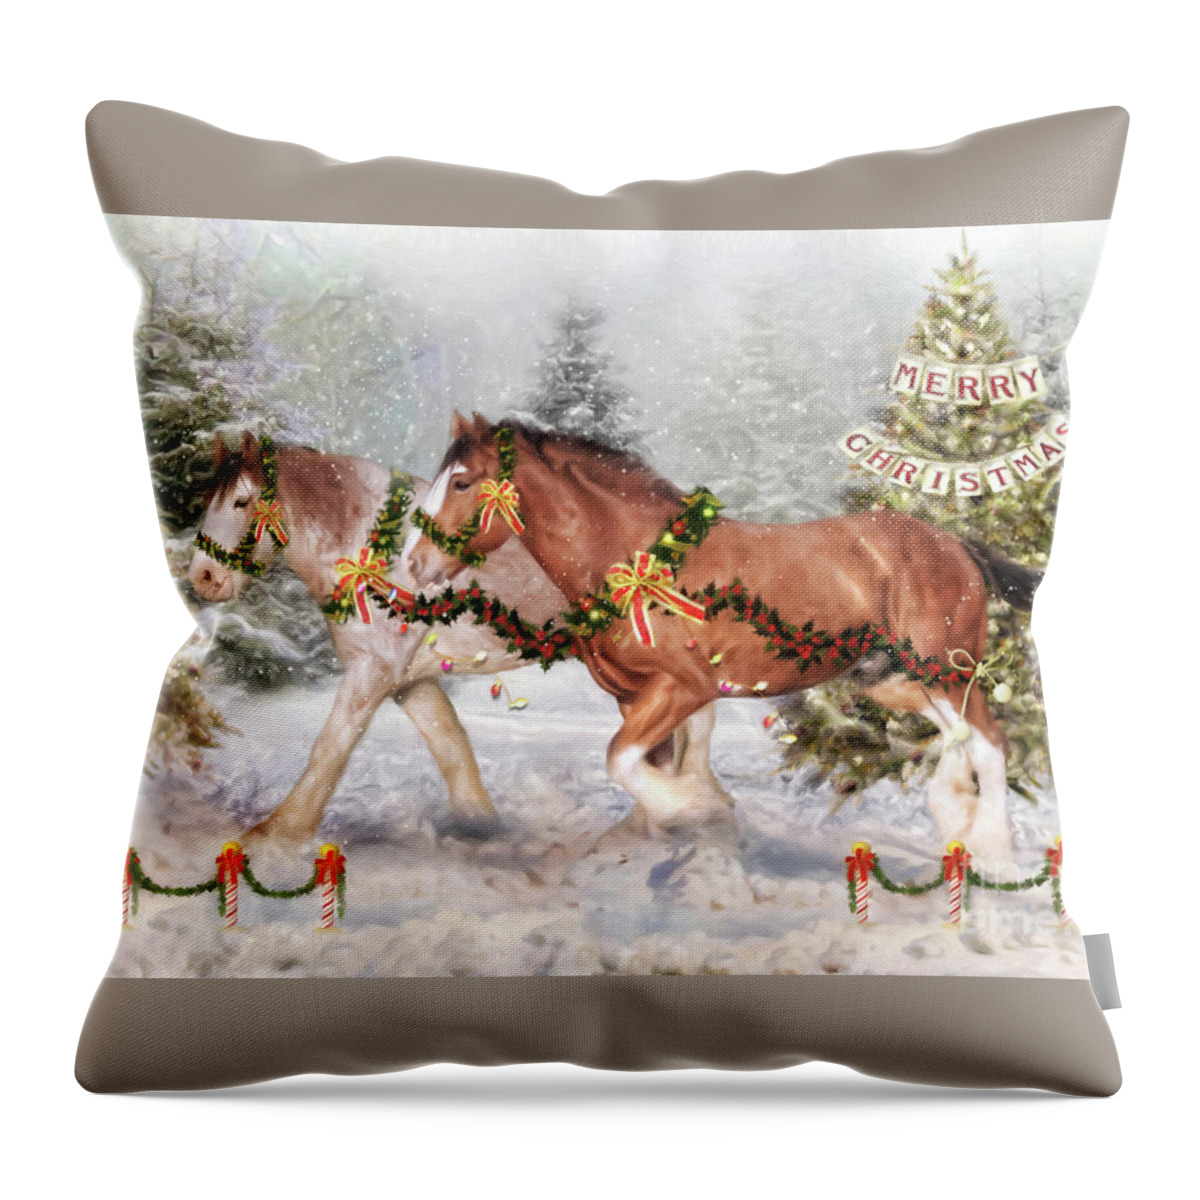 Clydesdale Throw Pillow featuring the digital art Festive Fun by Trudi Simmonds